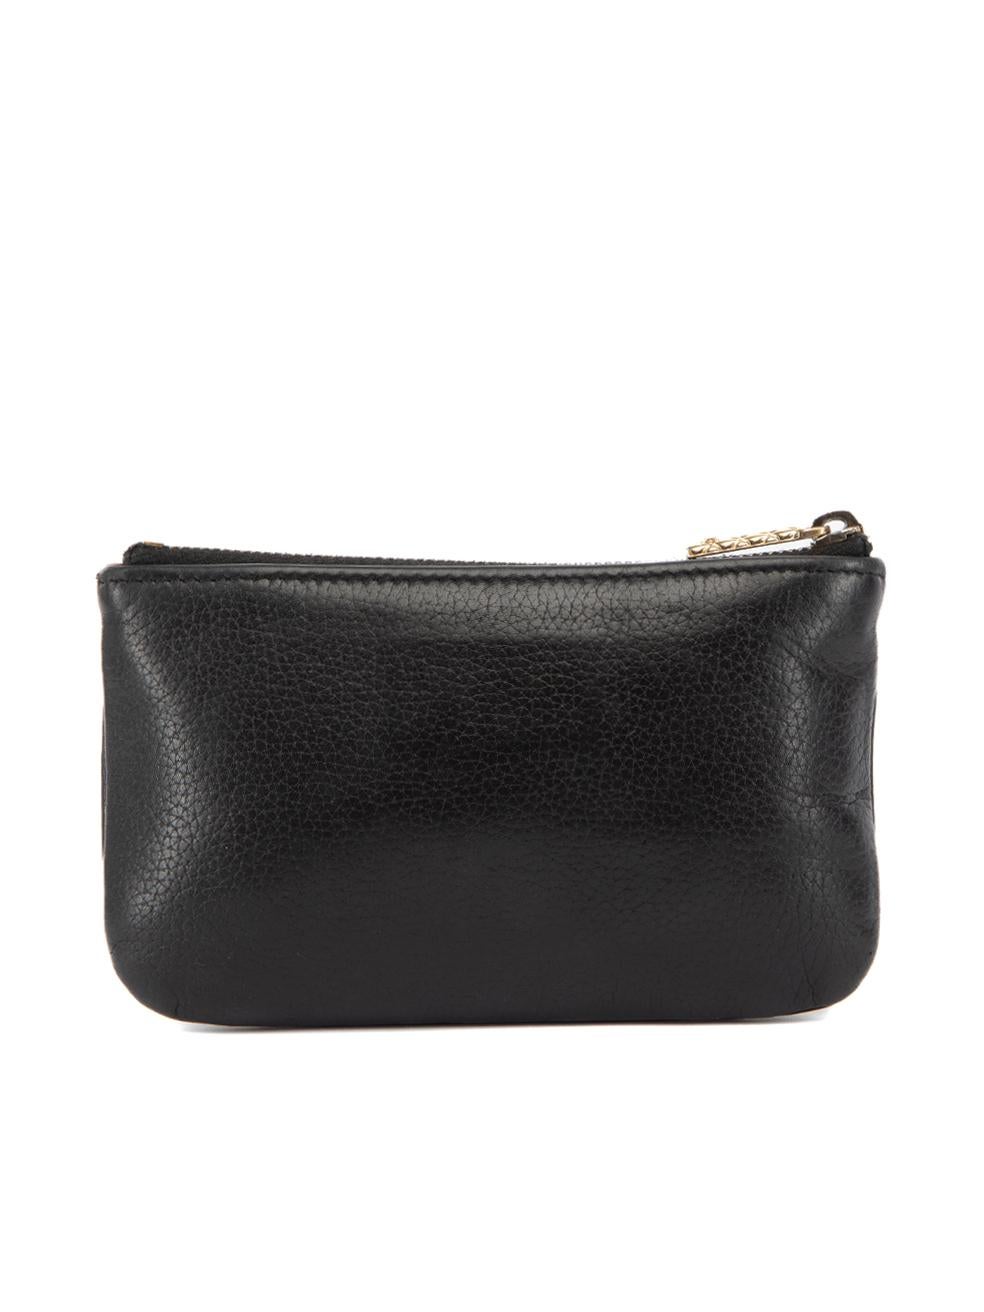 Chanel Women's Black Leather CC Zip Top Coin Purse In Excellent Condition In London, GB